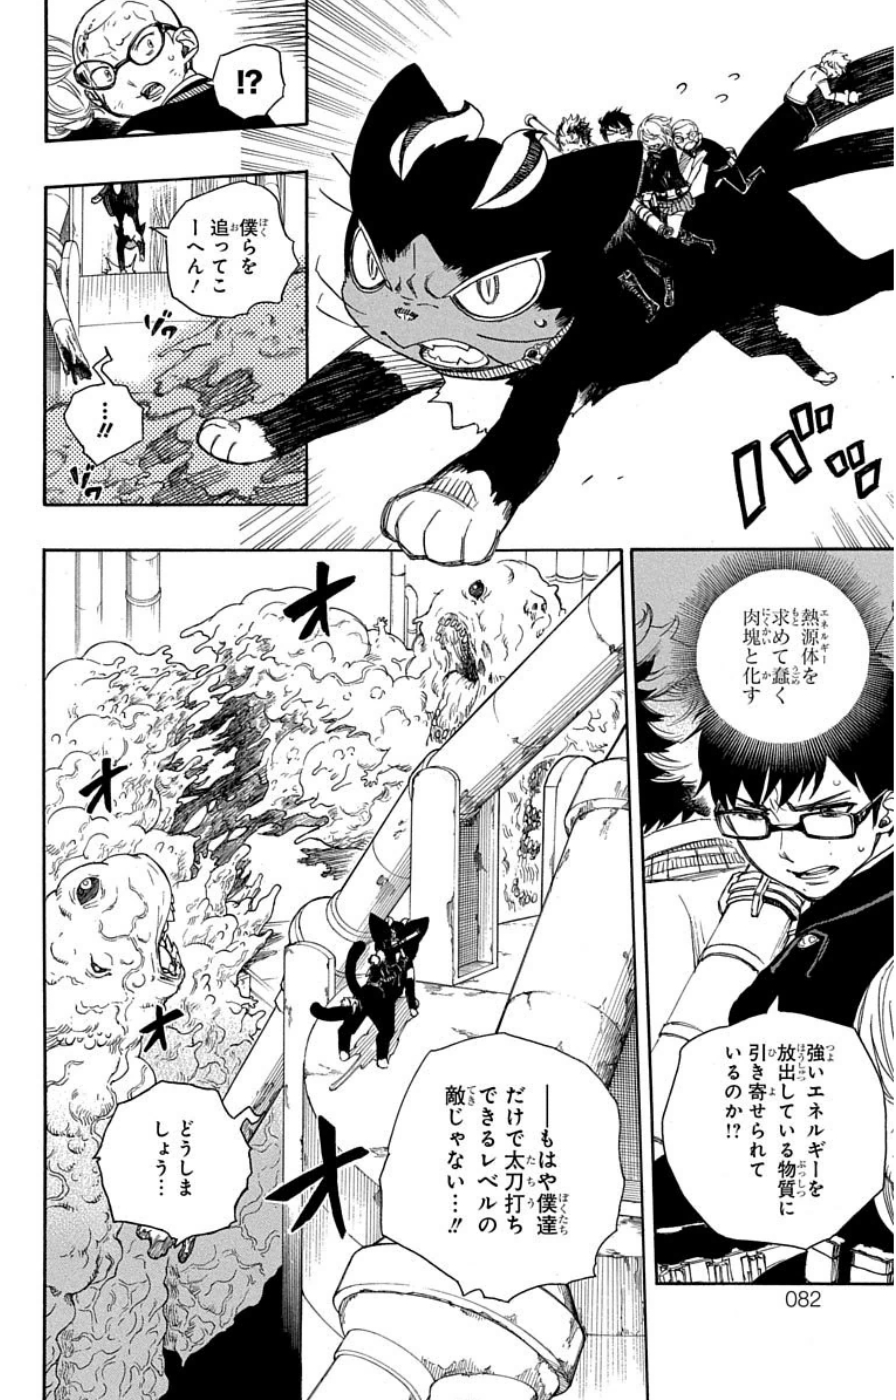 Ao no Exorcist - Chapter 60 - Page 2